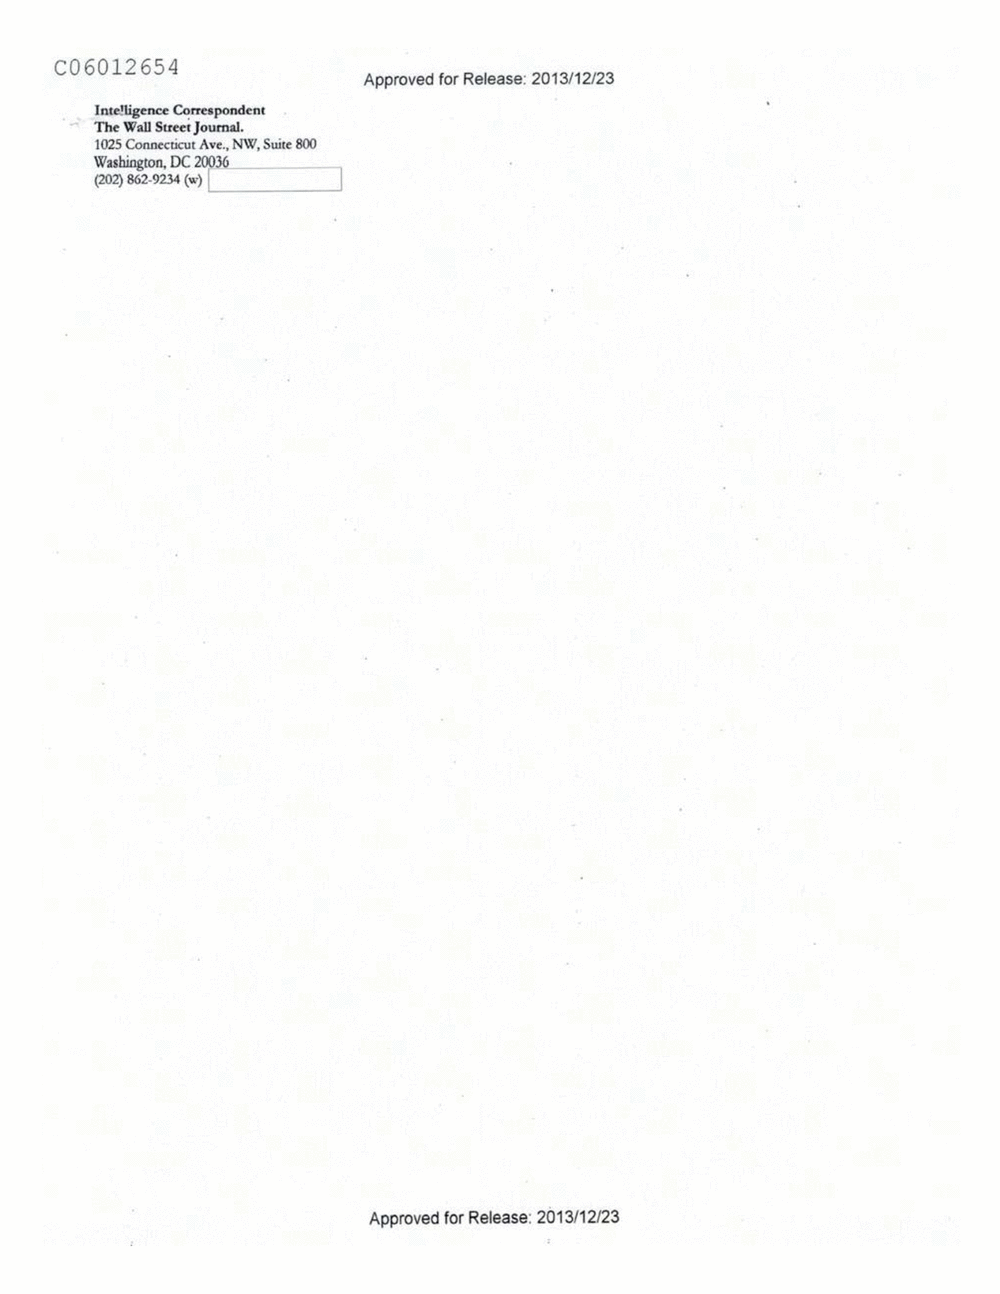 Page 231 from Email Correspondence Between Reporters and CIA Flacks